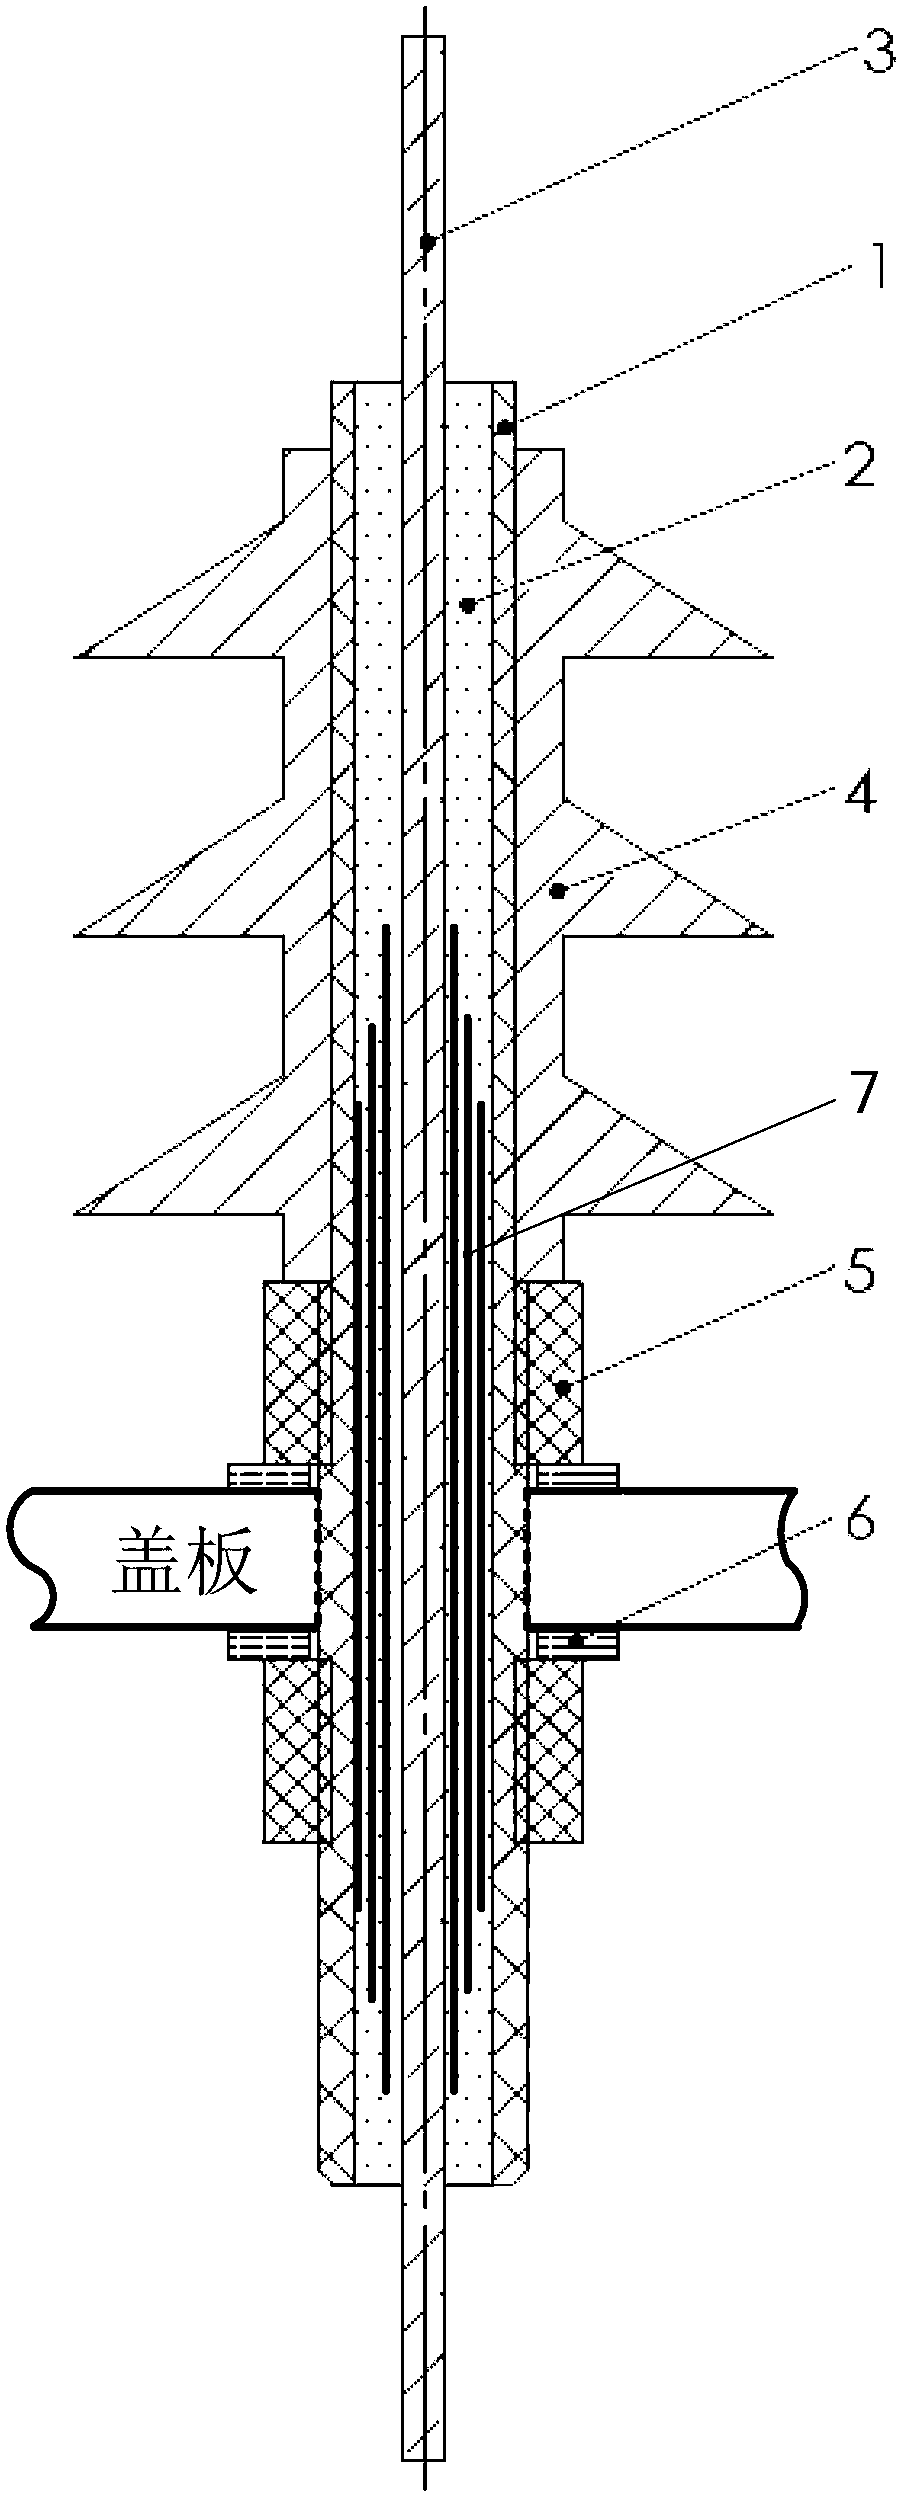 Line outgoing casing pipe applied to high-pressure superconductivity electrical equipment